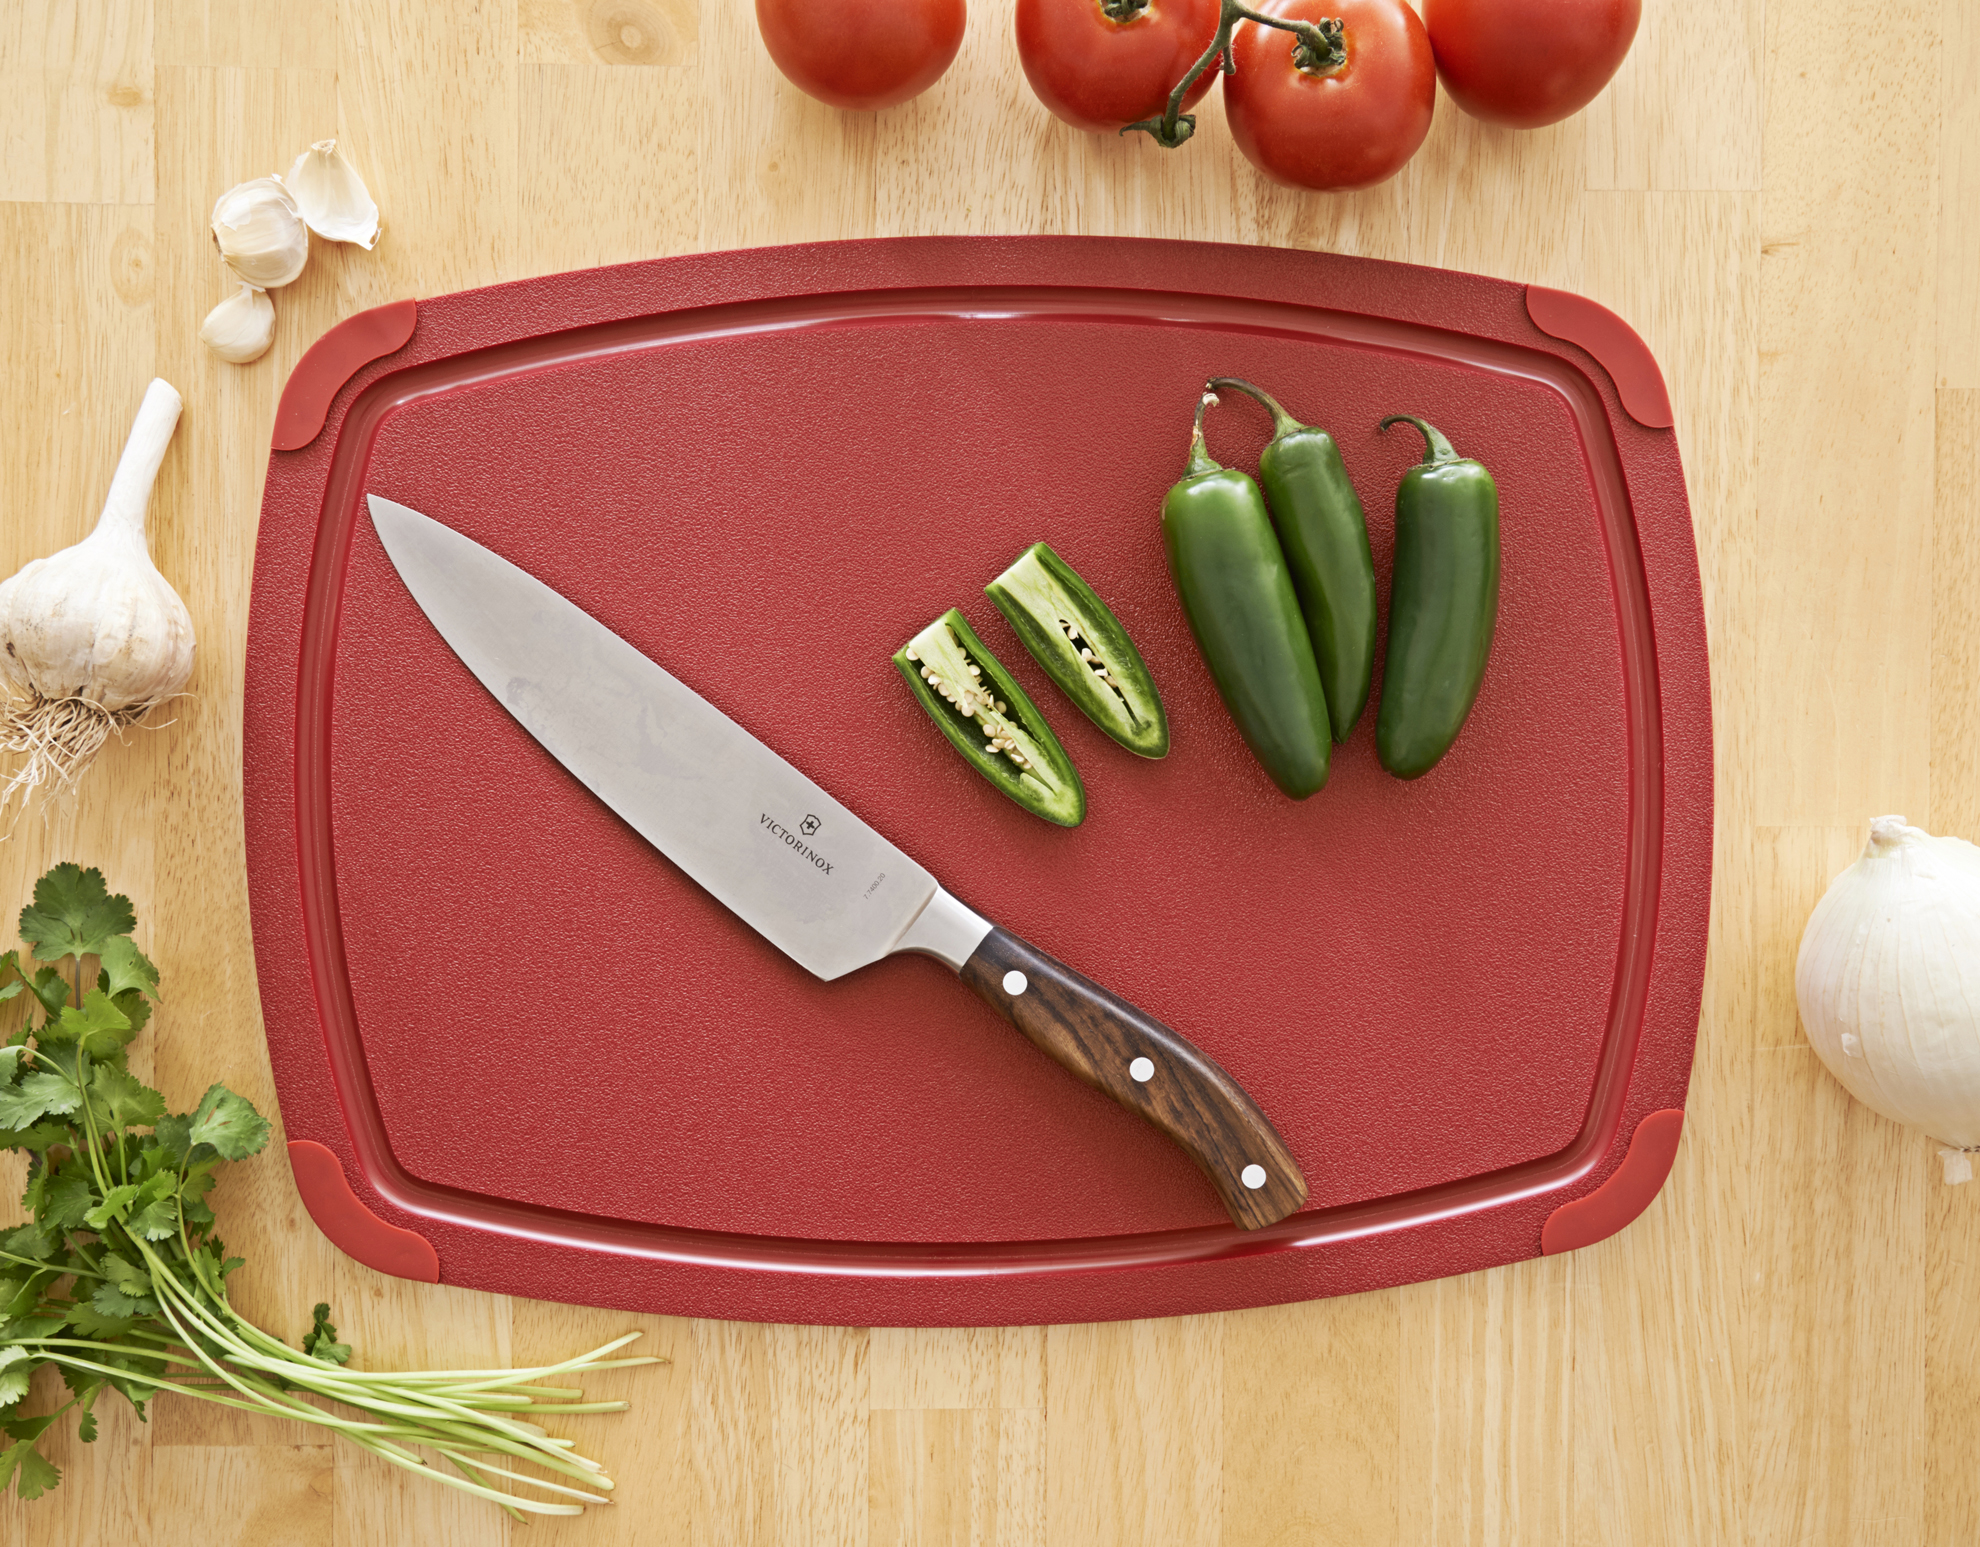 ecooks-image1-cutting board poly series-red-402181301-env